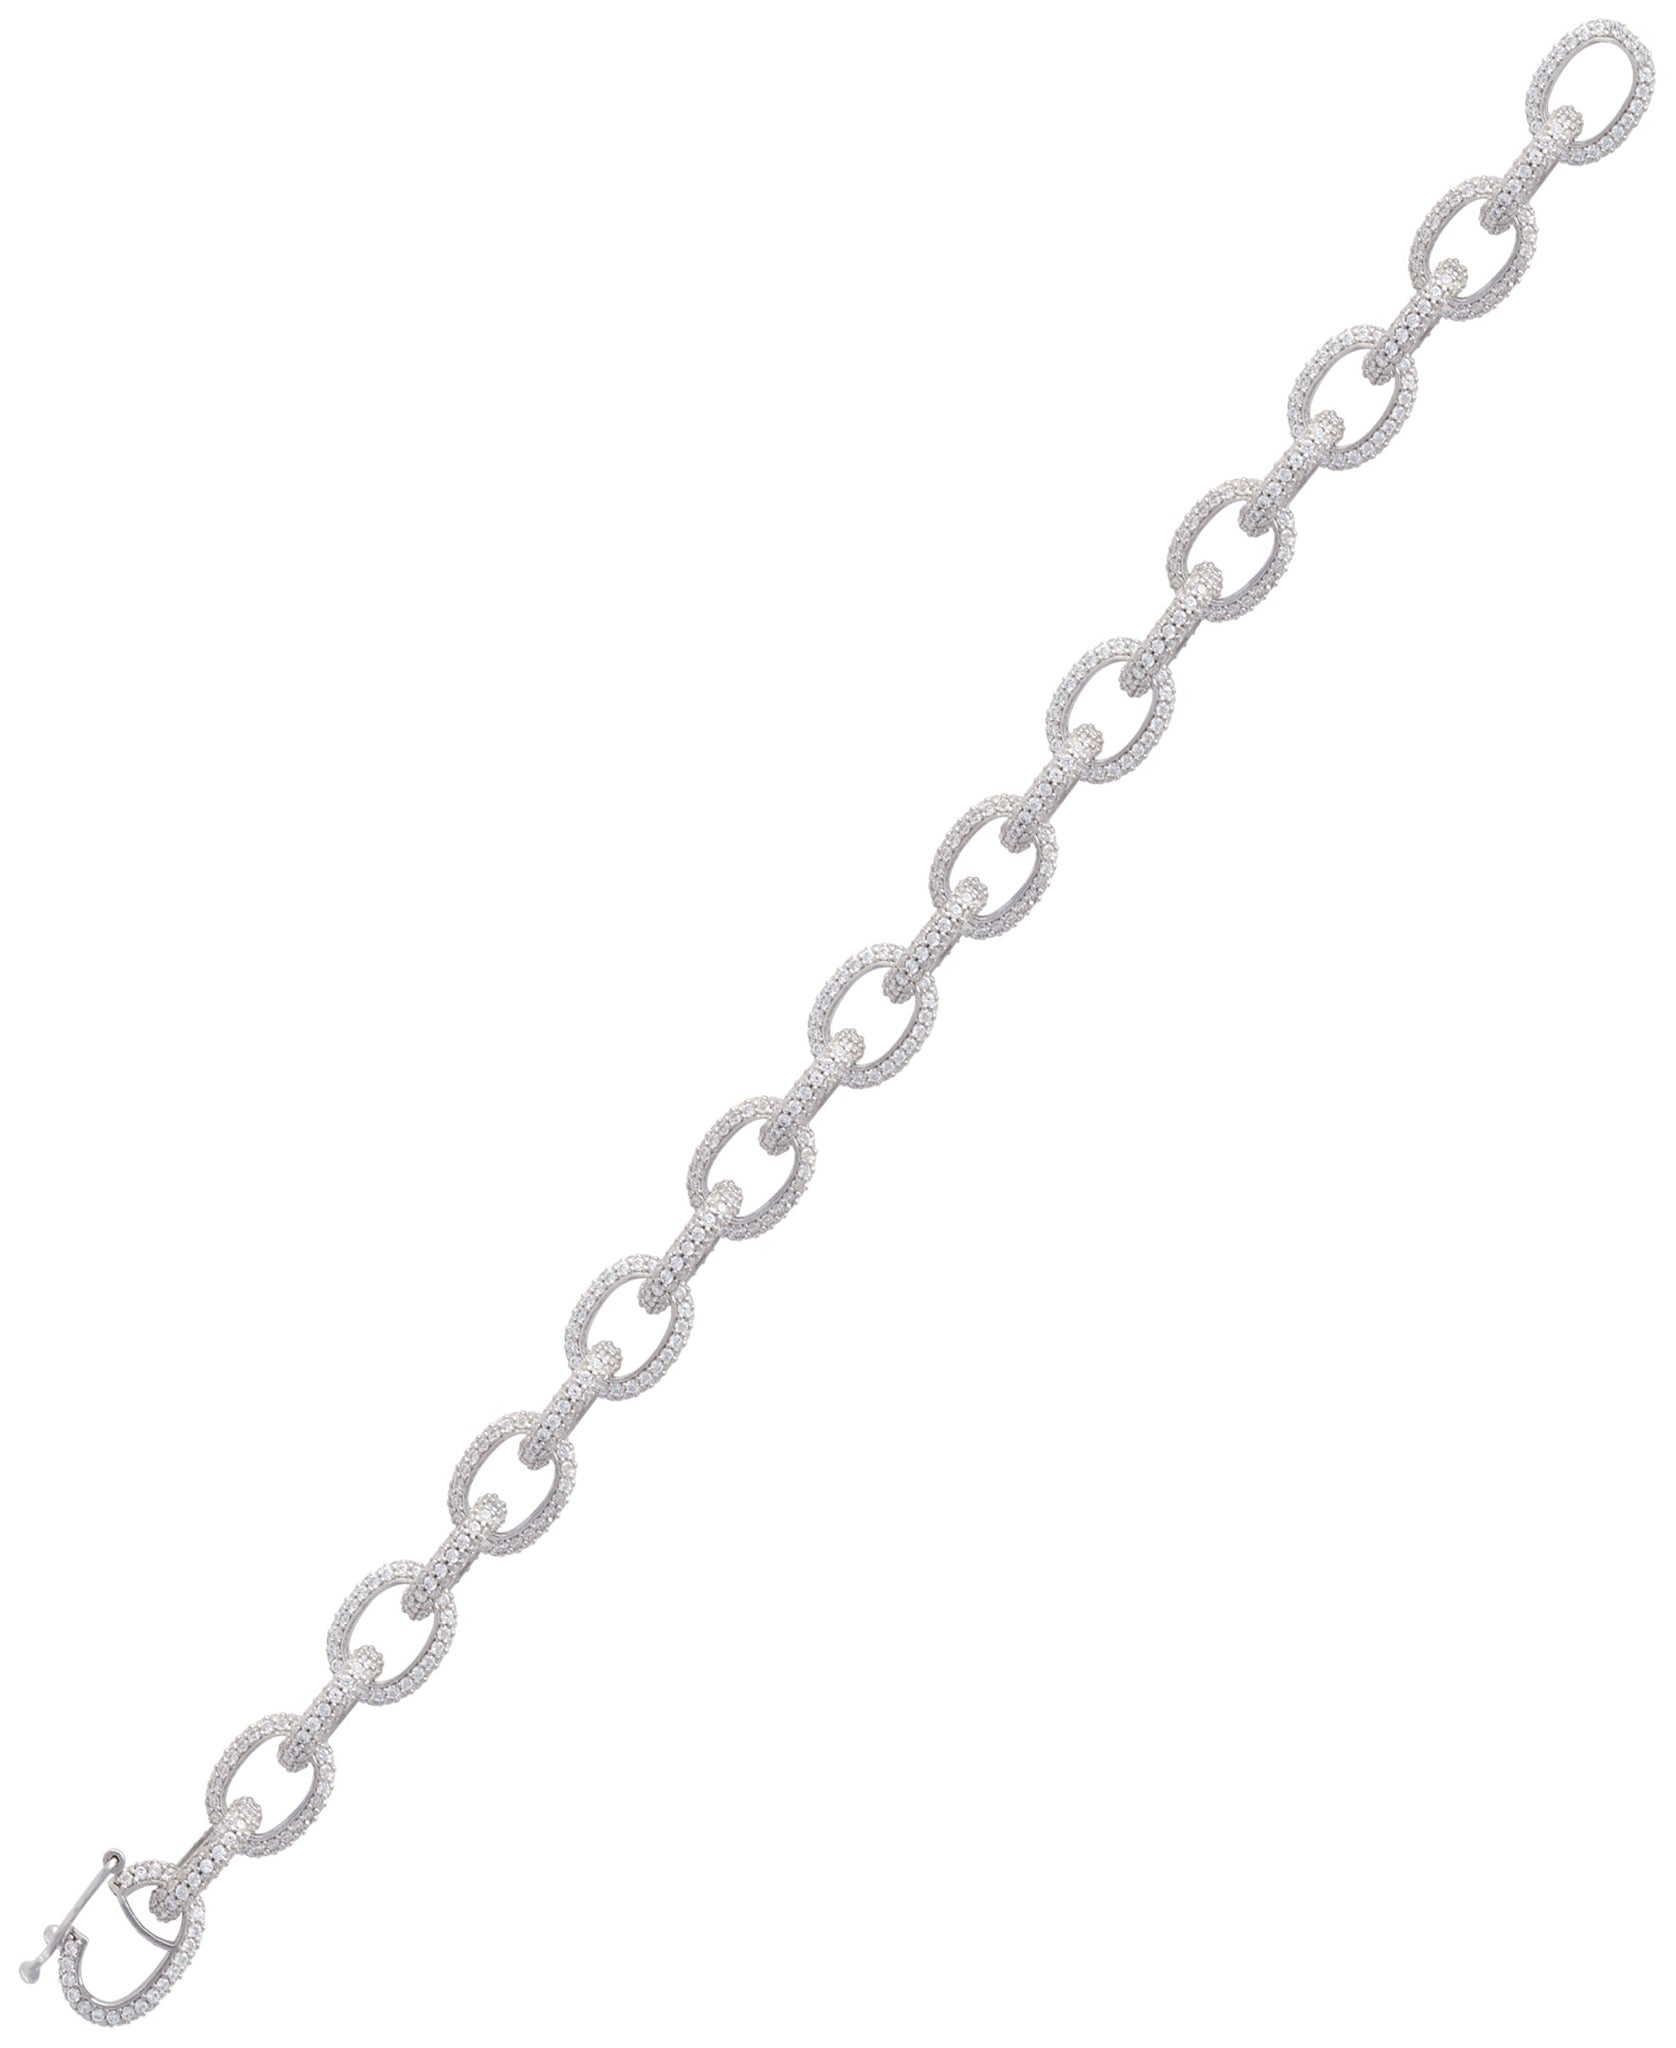 Rhona Sutton Plated Sterling Silver Crystal Cable Chain Bracelet - Rhona Sutton Jewellery